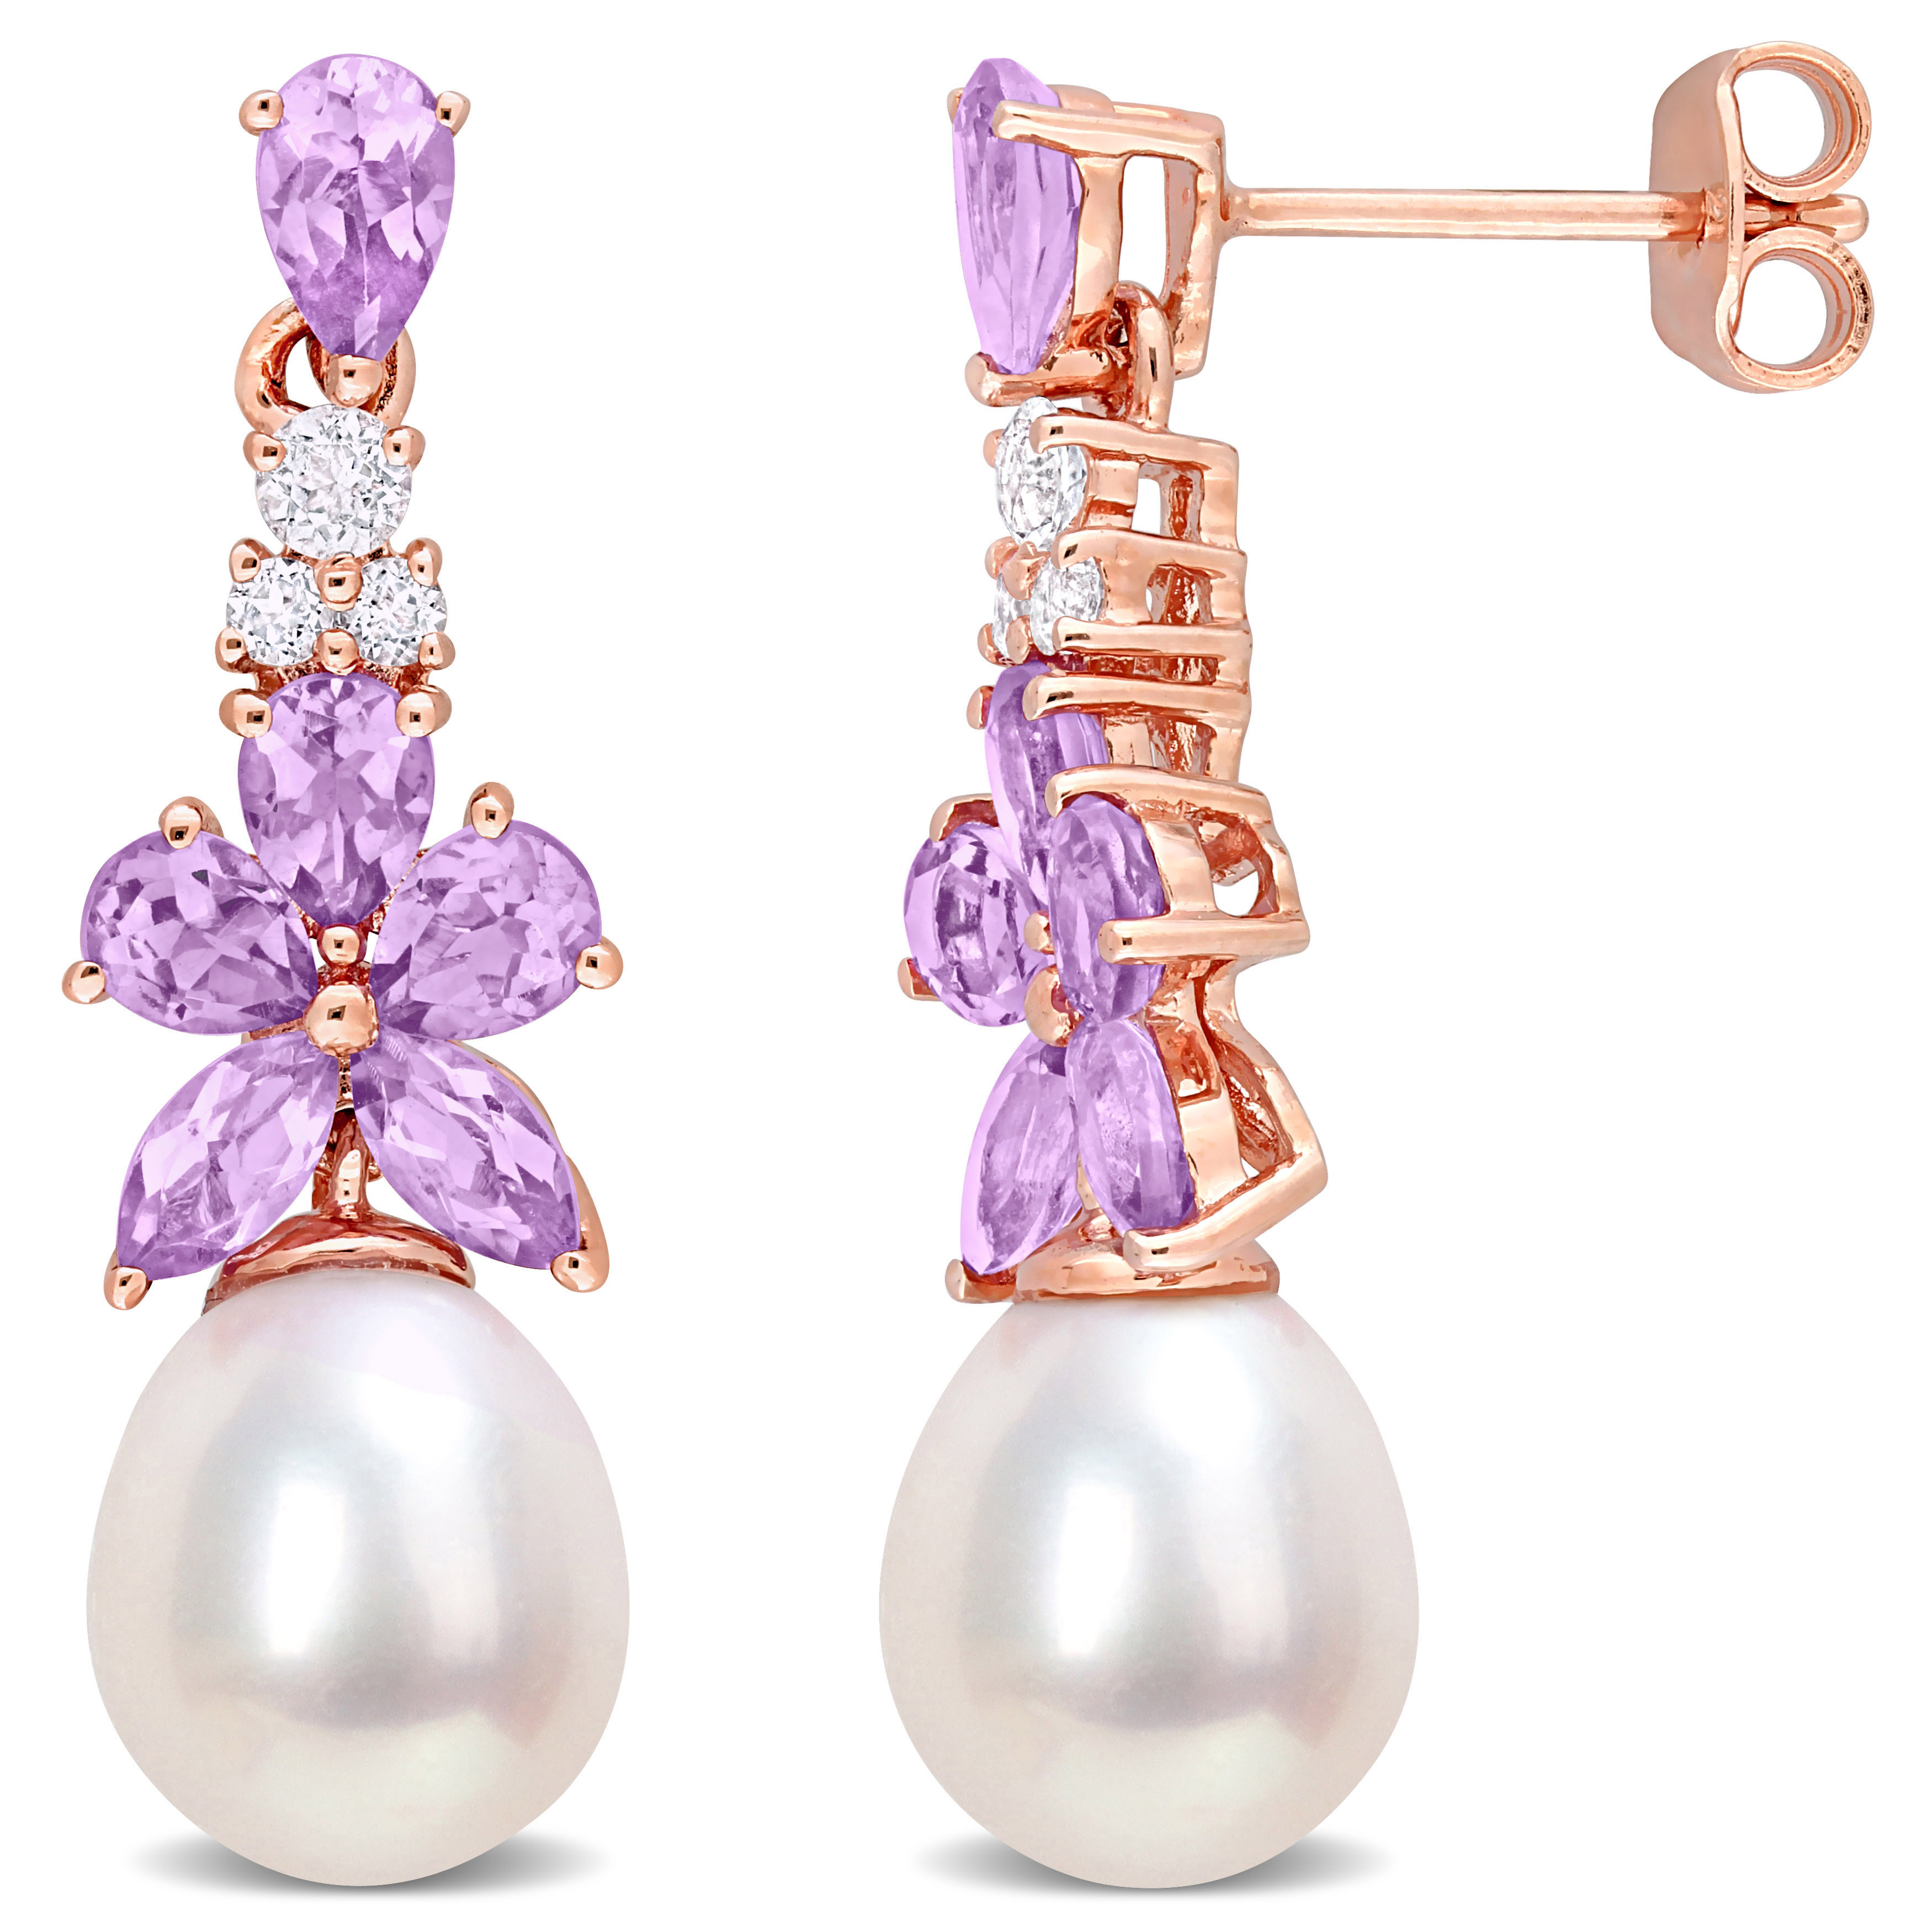 Amethyst, White Topaz and Rose de France and 8.5 - 9 MM White Cultured Freshwater Pearl Drop Earrings in 18k Rose Gold Plated Sterling Silver